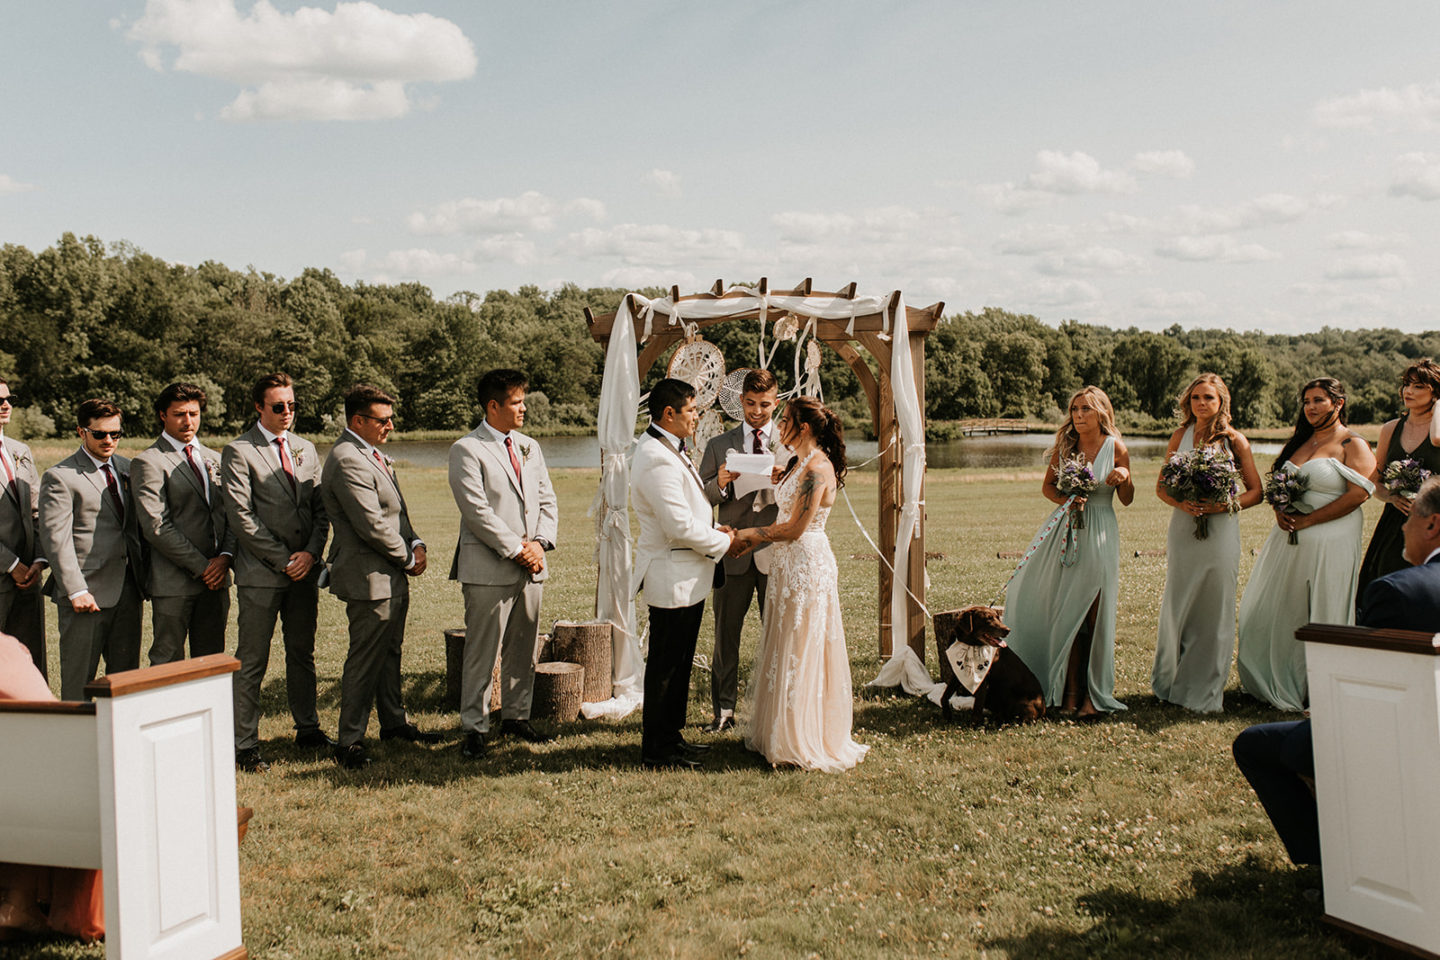 Rustic Luxe Ethical Wedding At Born To Run Farm, New Jersey